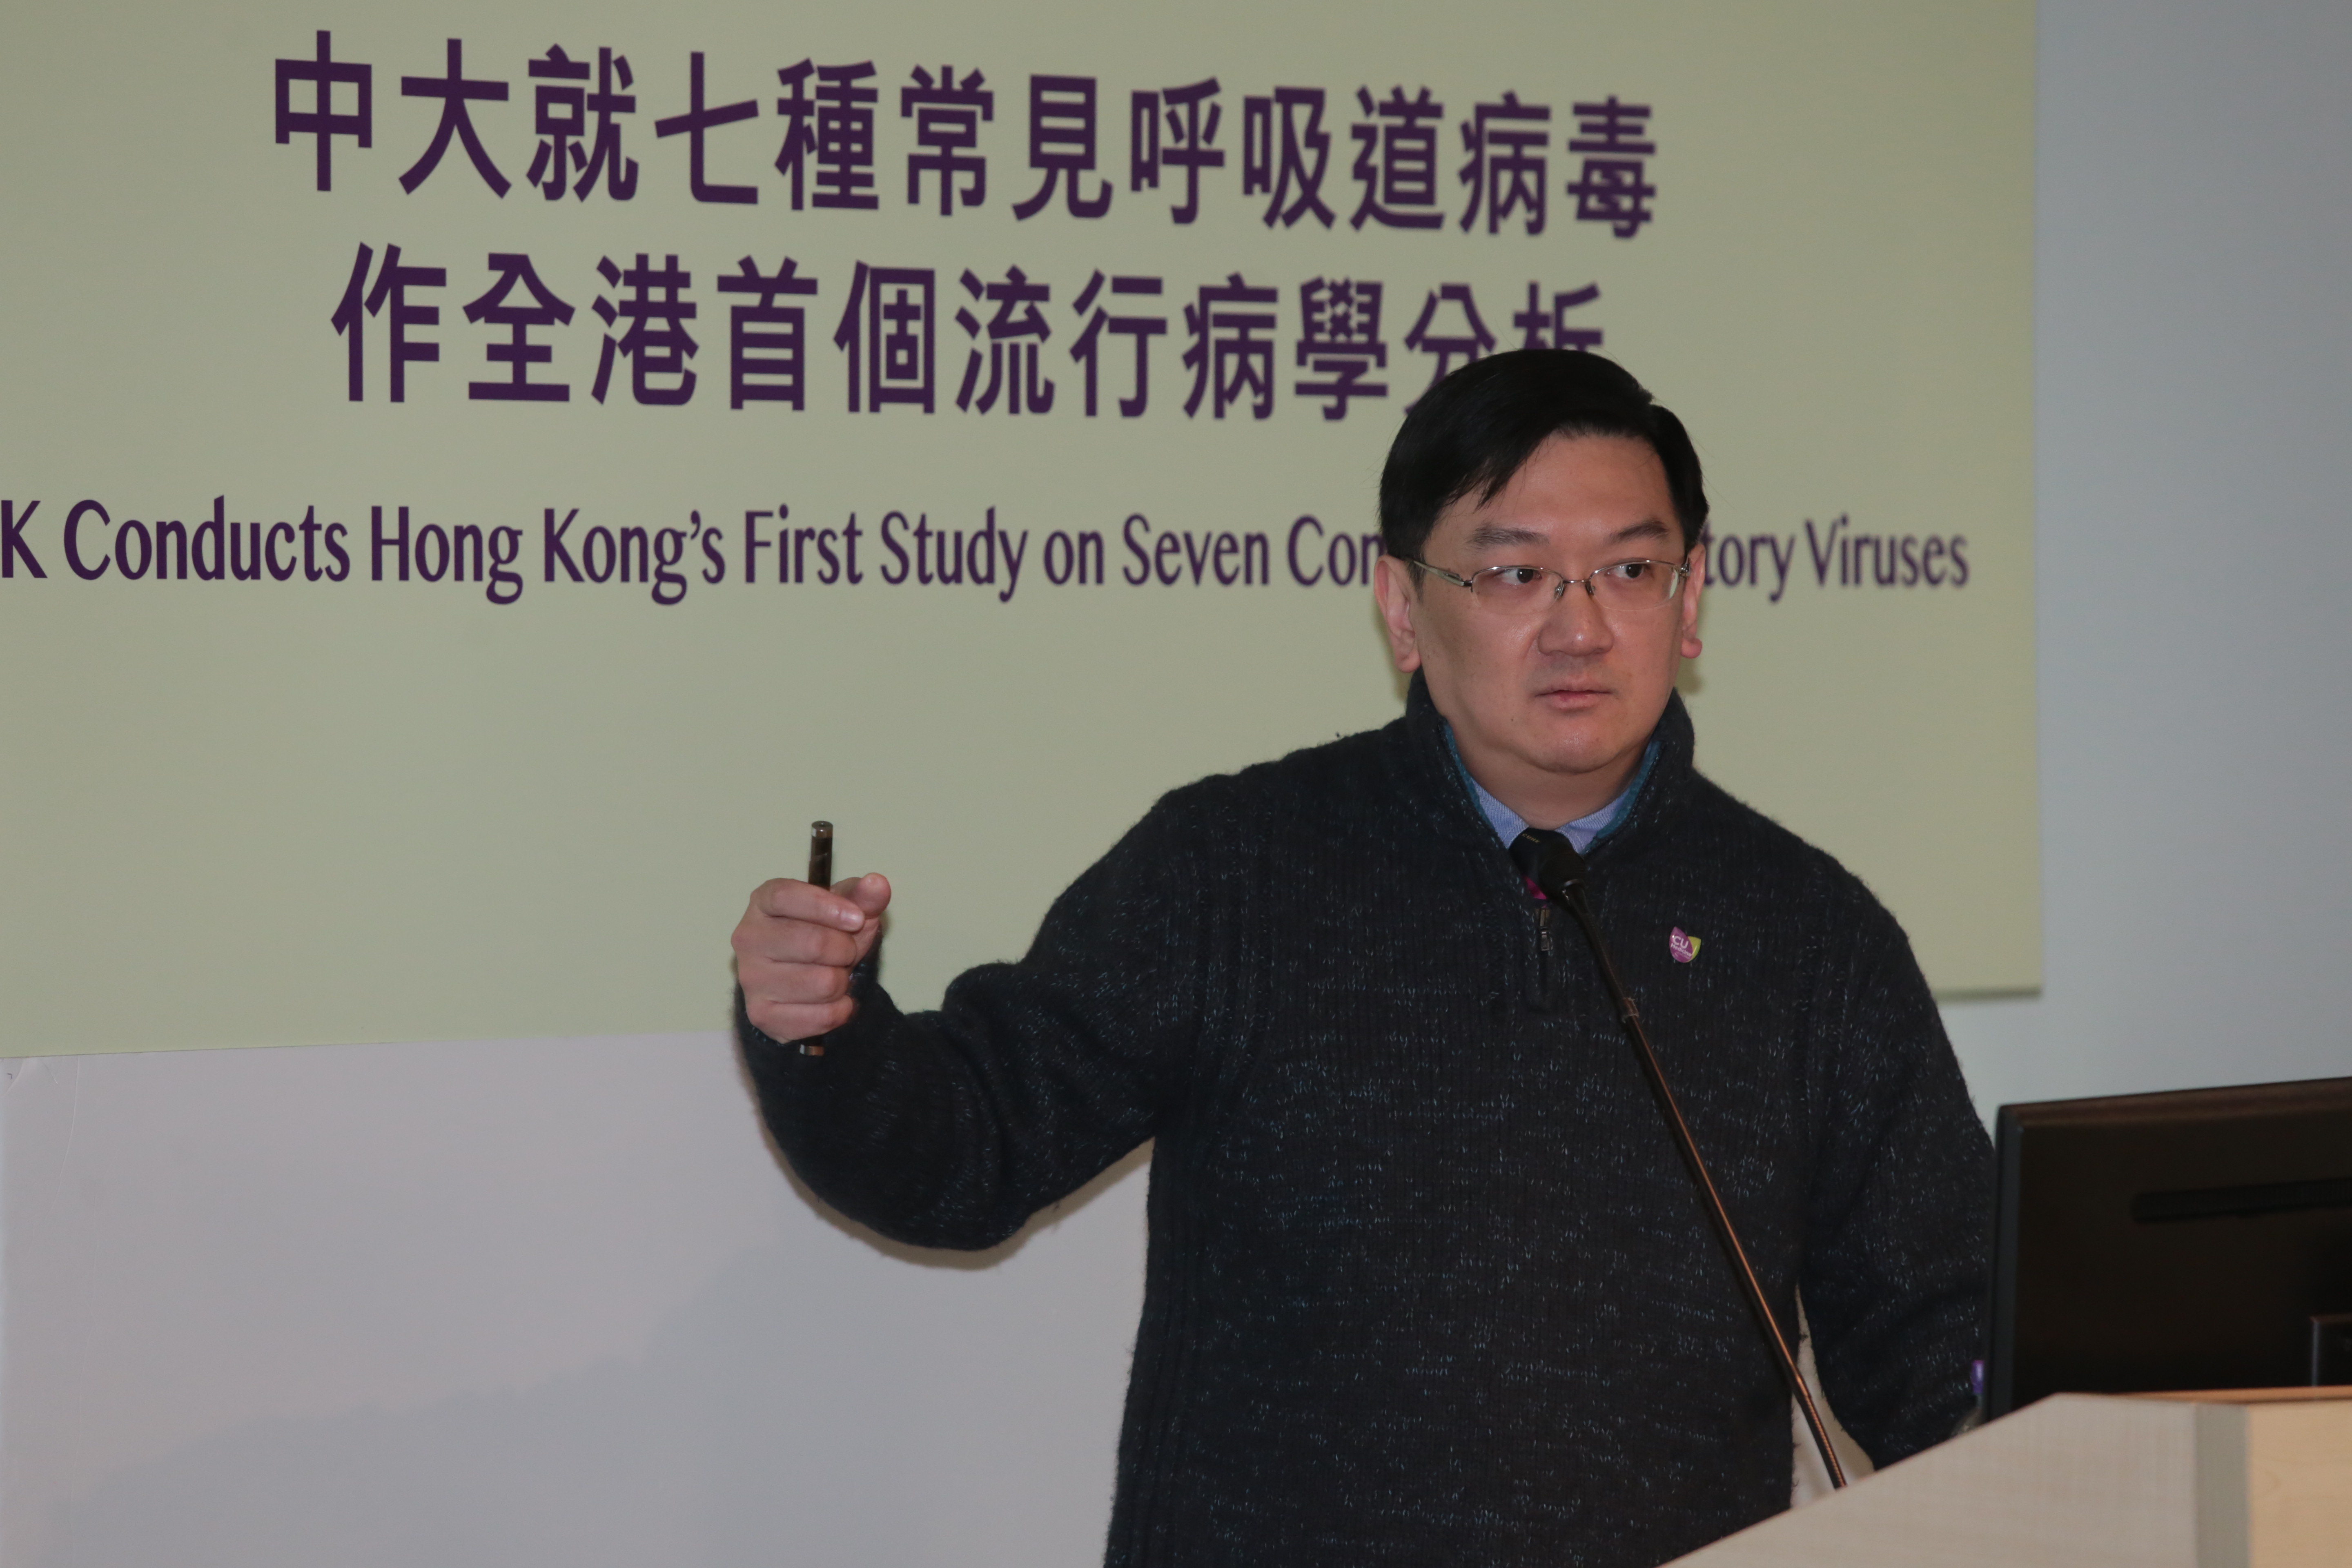 Prof. Ting Fan LEUNG, Chairman, Department of Paedetrics states that RSV is the prime virus leading to bronchiolitis and pneumonia for infants under the age of one.